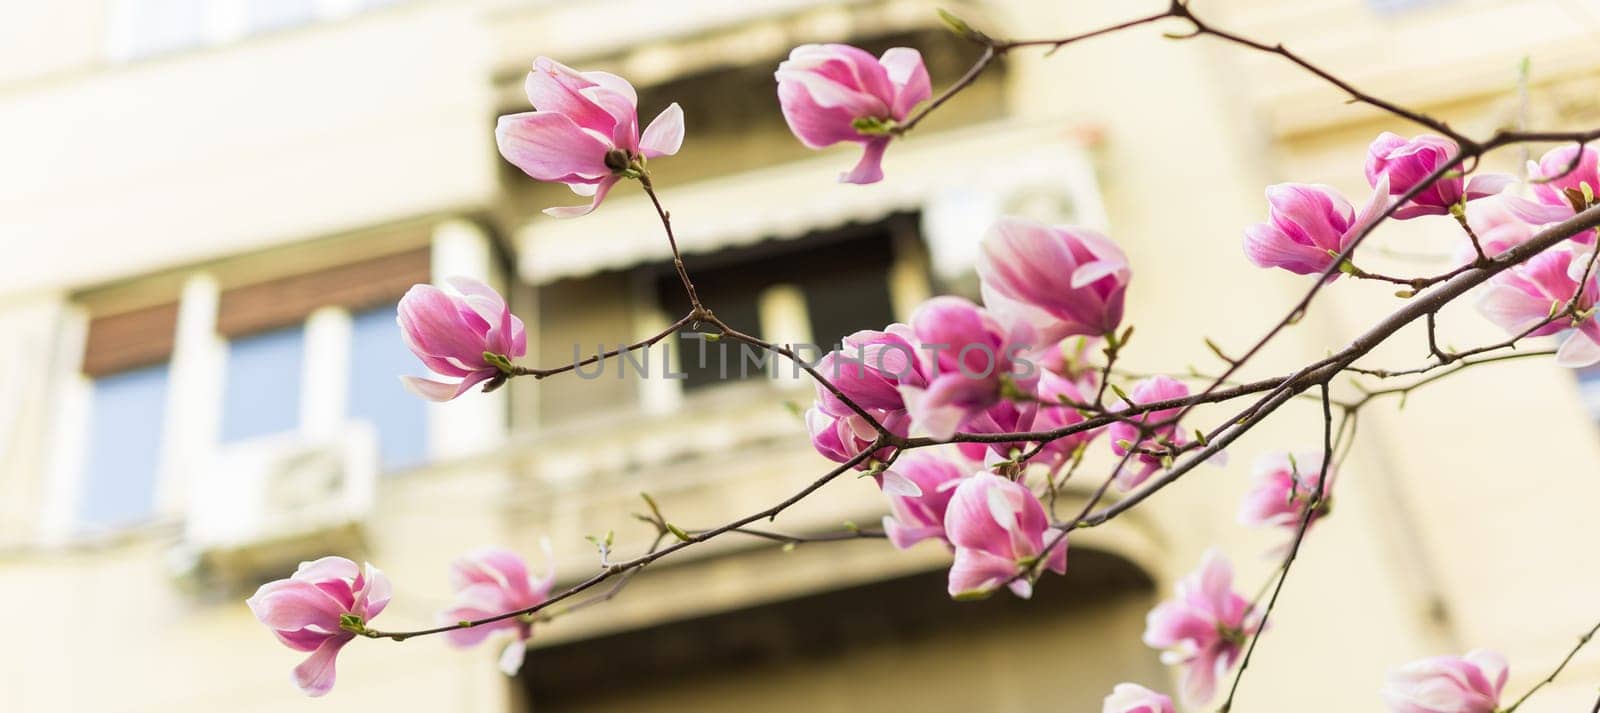 Banner blooming pink magnolias on the streets and in the courtyards of houses. Magnolia tree with pink flowers by Satura86